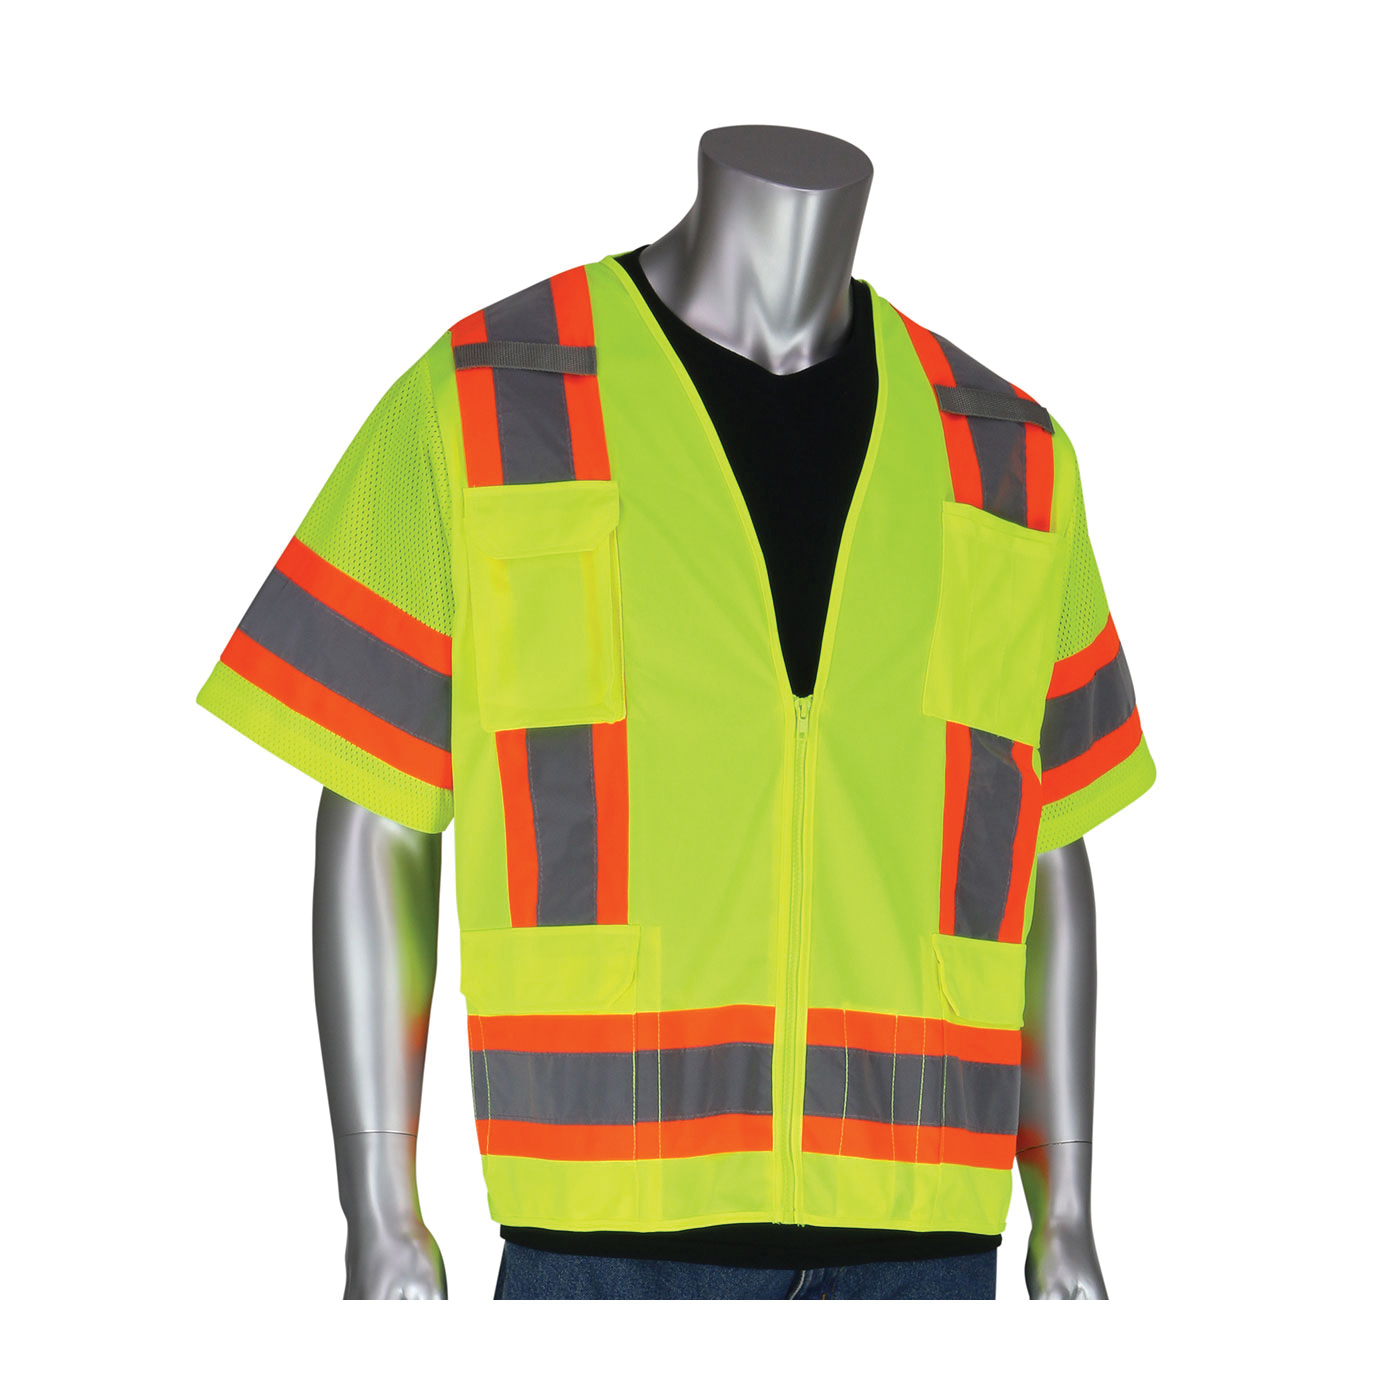 PIP® 303-0500-LY 2-Tone Surveyor Safety Vest, Hi-Viz Lime Yellow, Polyester Mesh/Solid Tricot, Zipper Closure, 11 Pockets, ANSI Class: Class 3, Specifications Met: ANSI 107 Type R